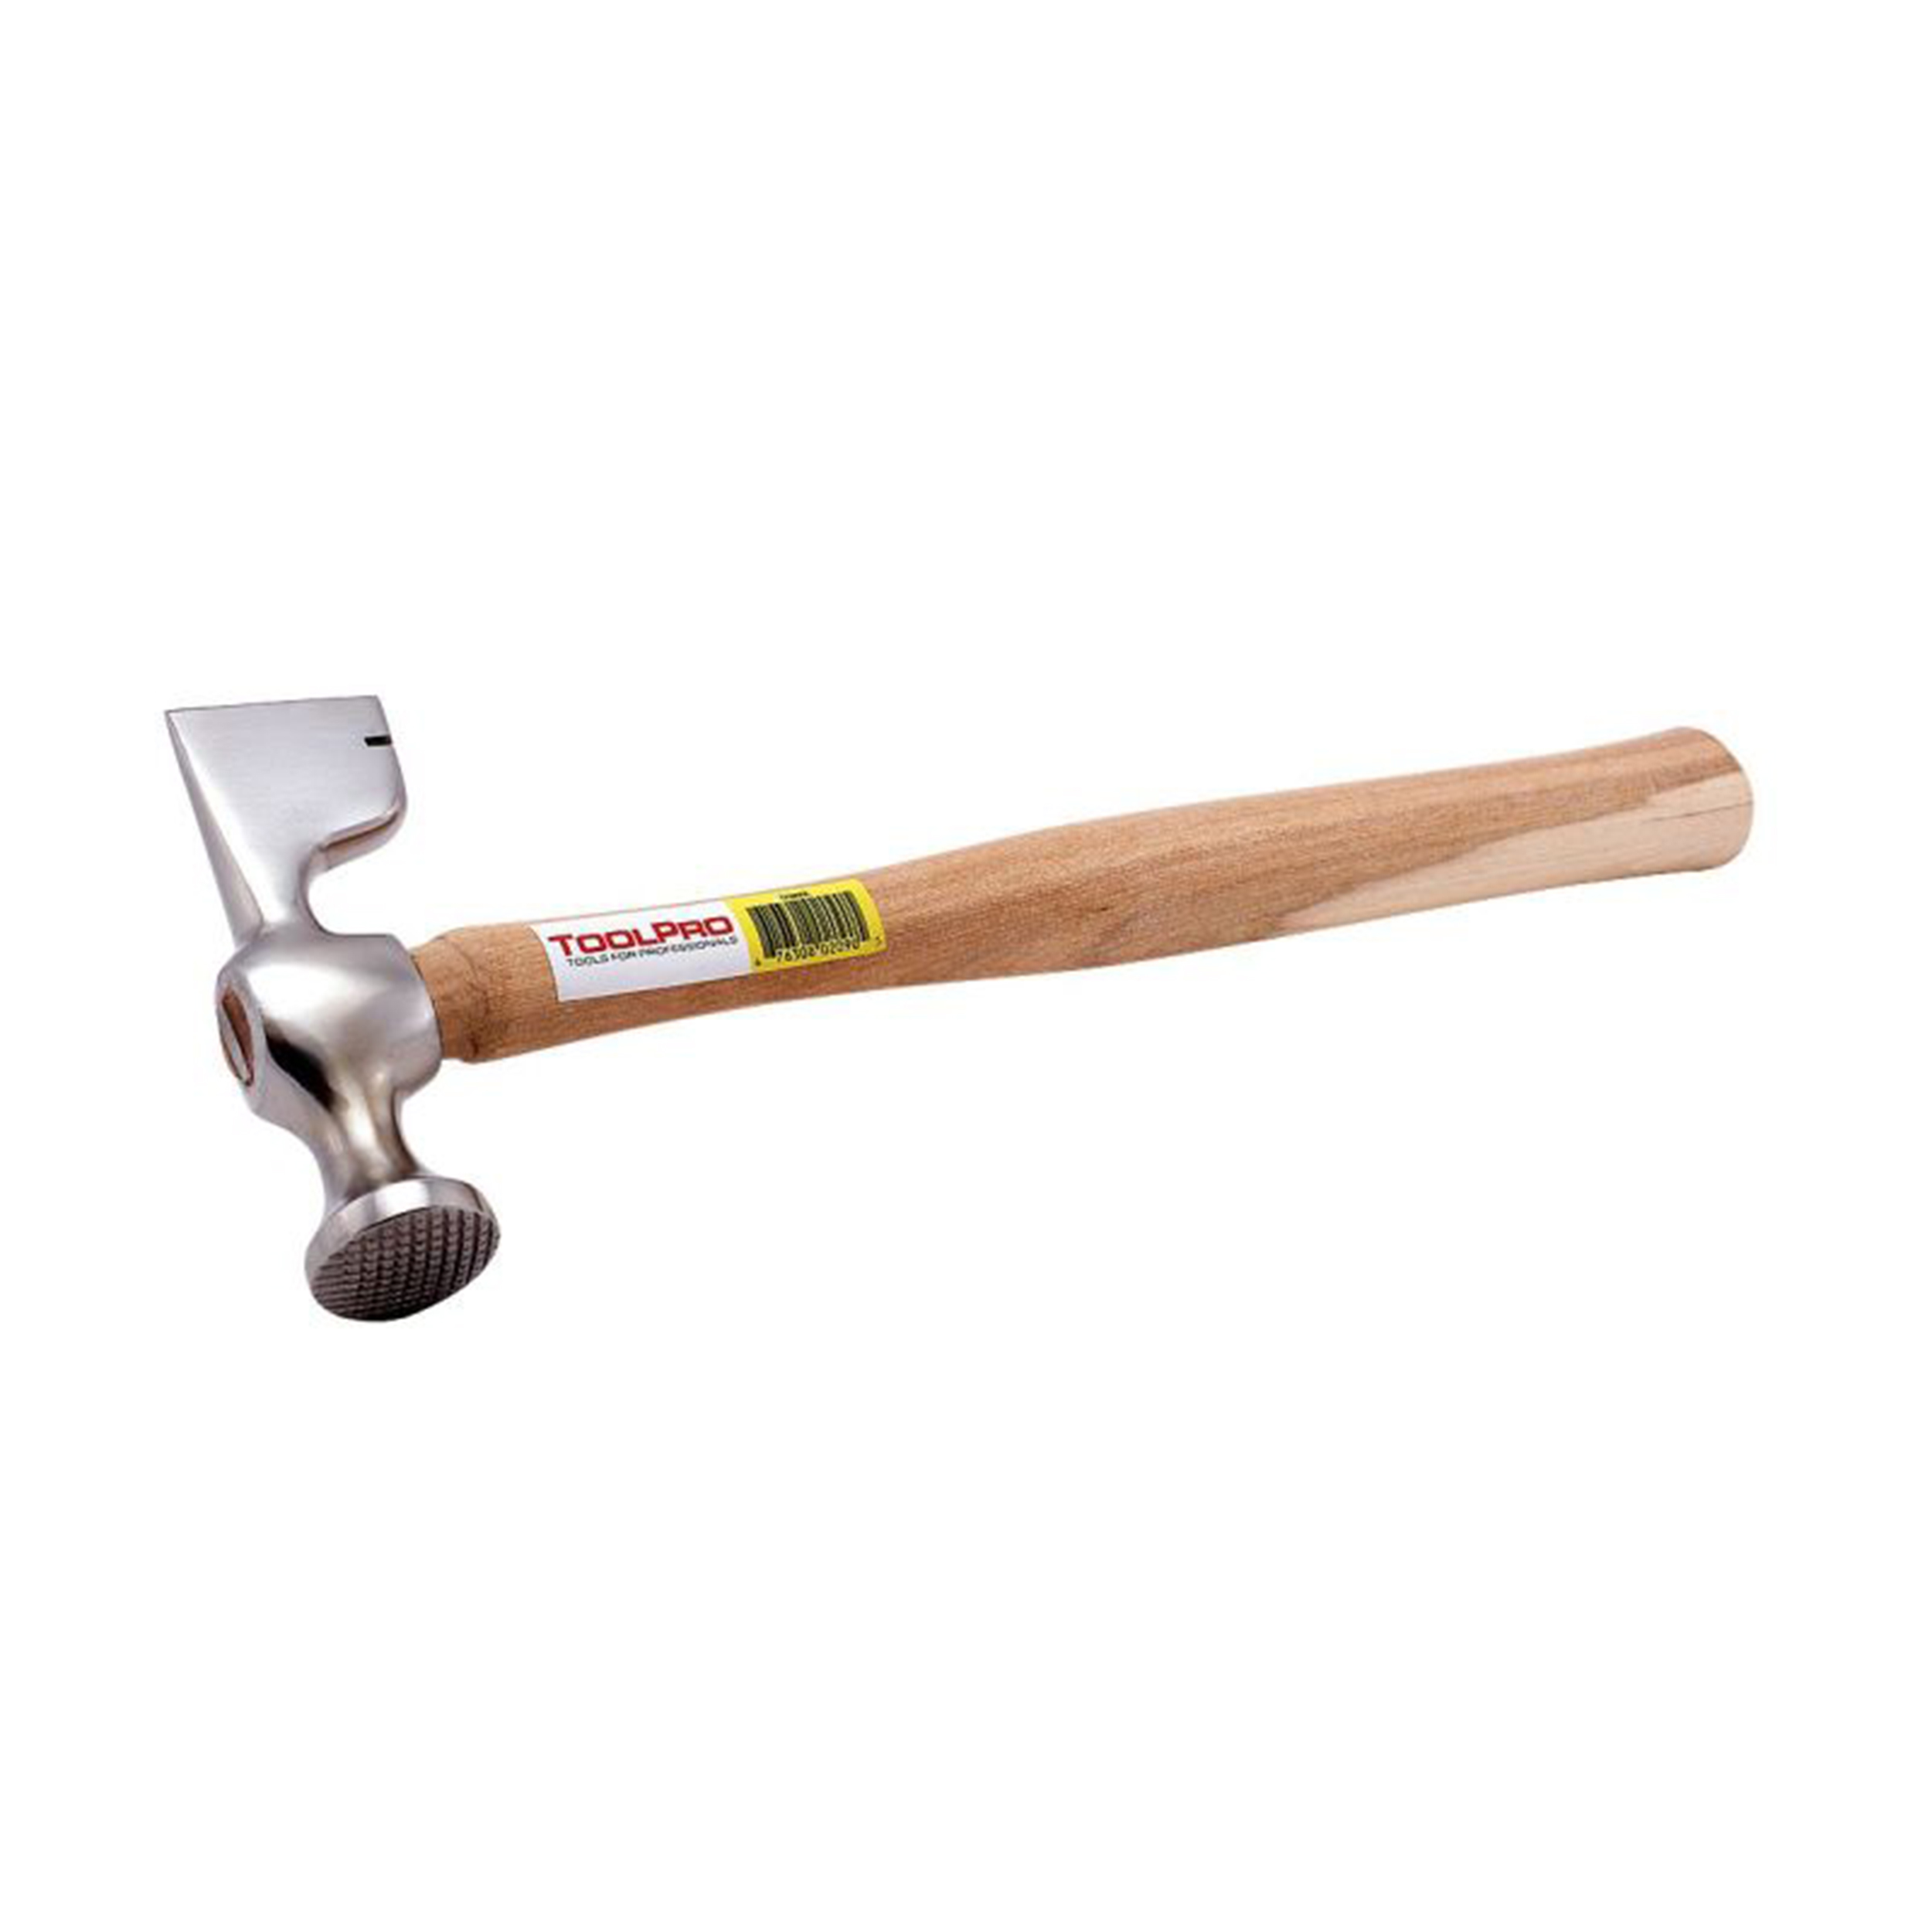 Drywall Hammer With 12oz. Head And 16" Handle